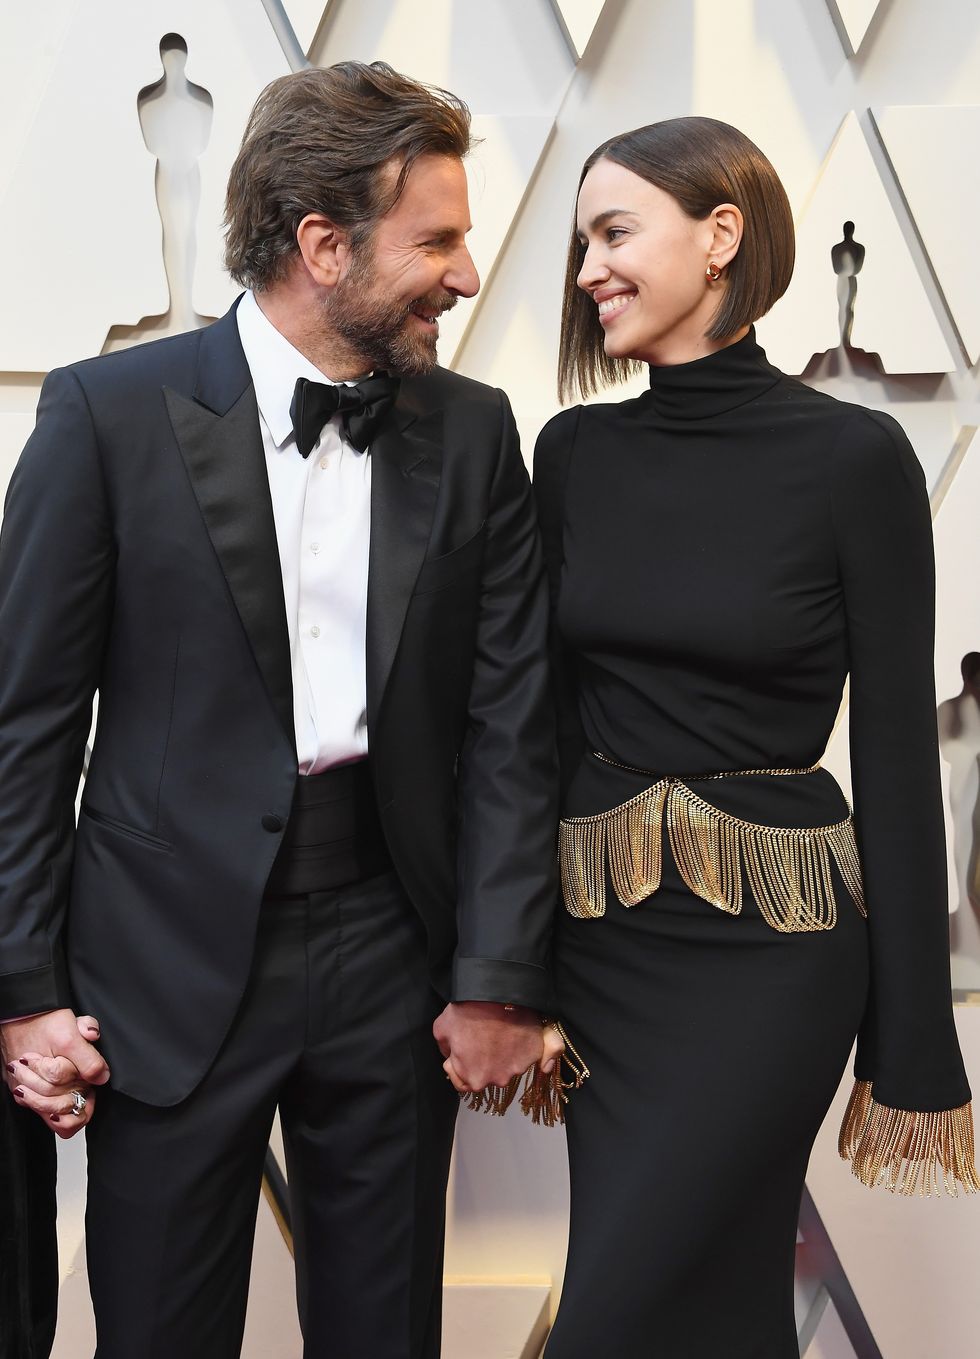 hollywood, ca   february 24  bradley cooper and irina shayk attend the 91st annual academy awards at hollywood and highland on february 24, 2019 in hollywood, california  photo by steve granitzwireimage